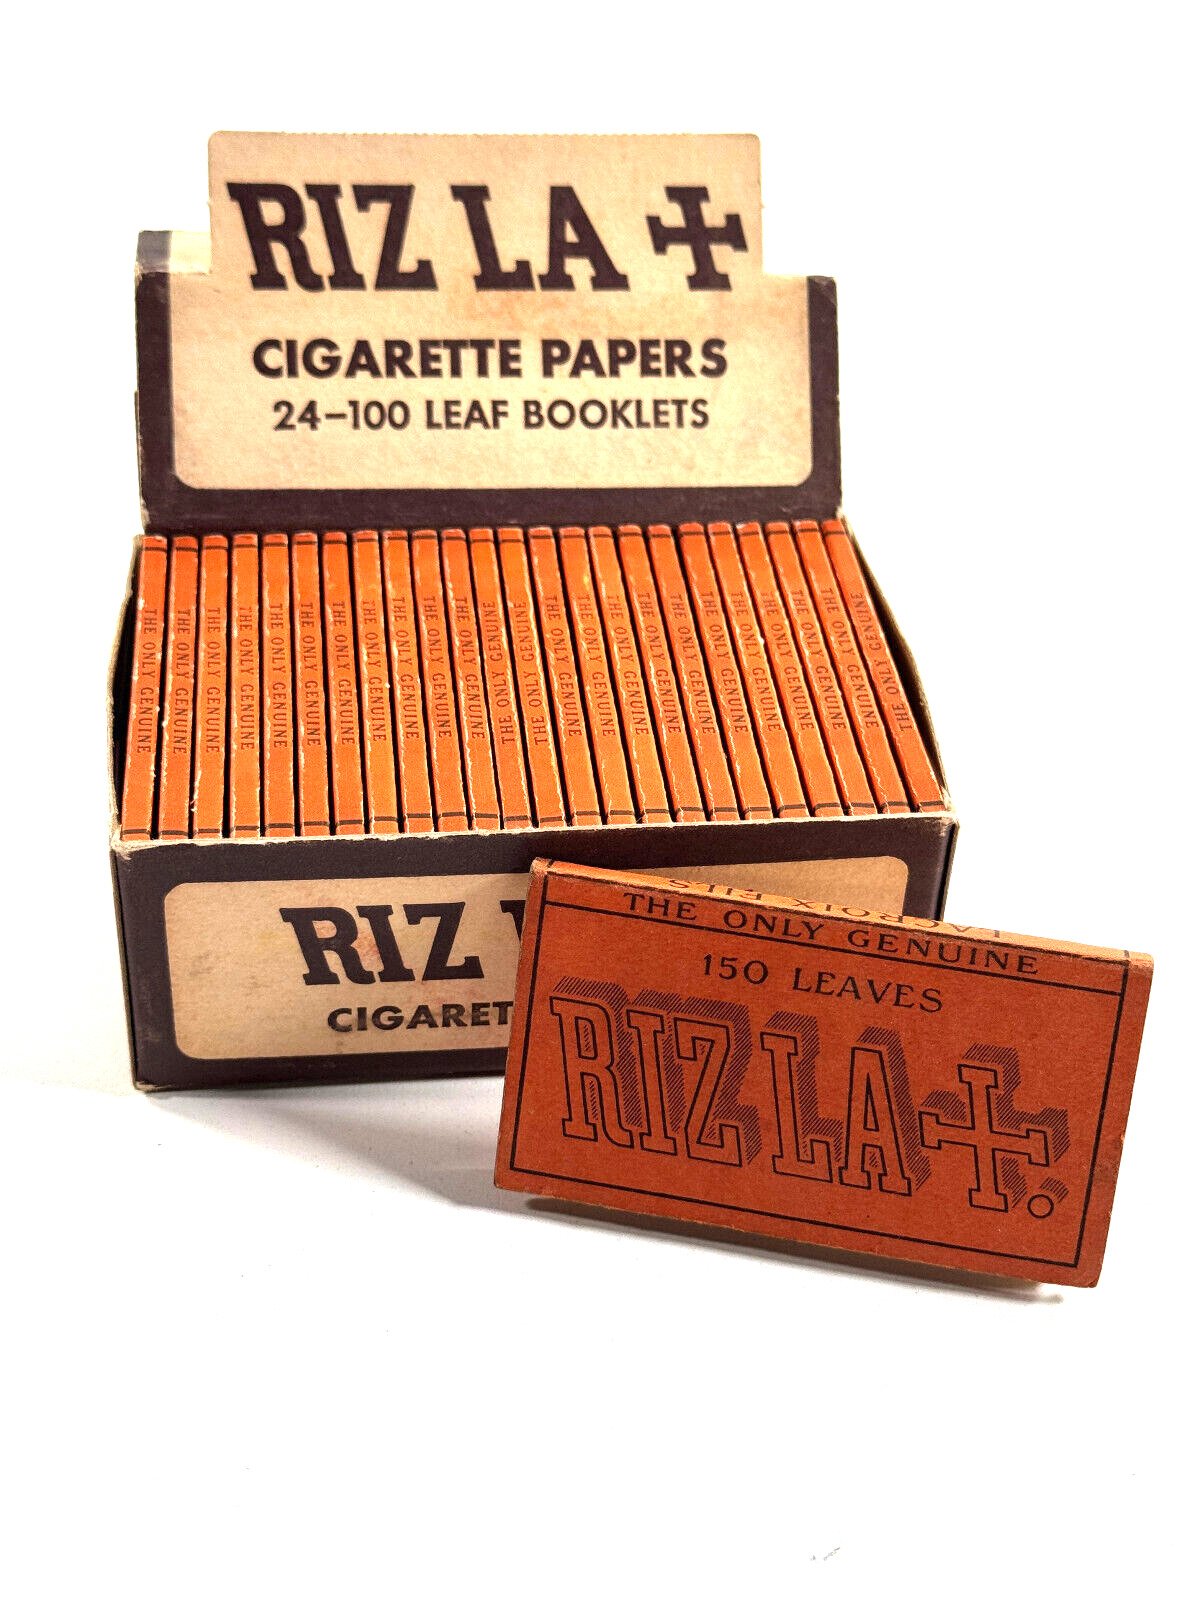 LOT (24) vintage RIZLA tobacco cigarette rolling papers FULL BOX store display